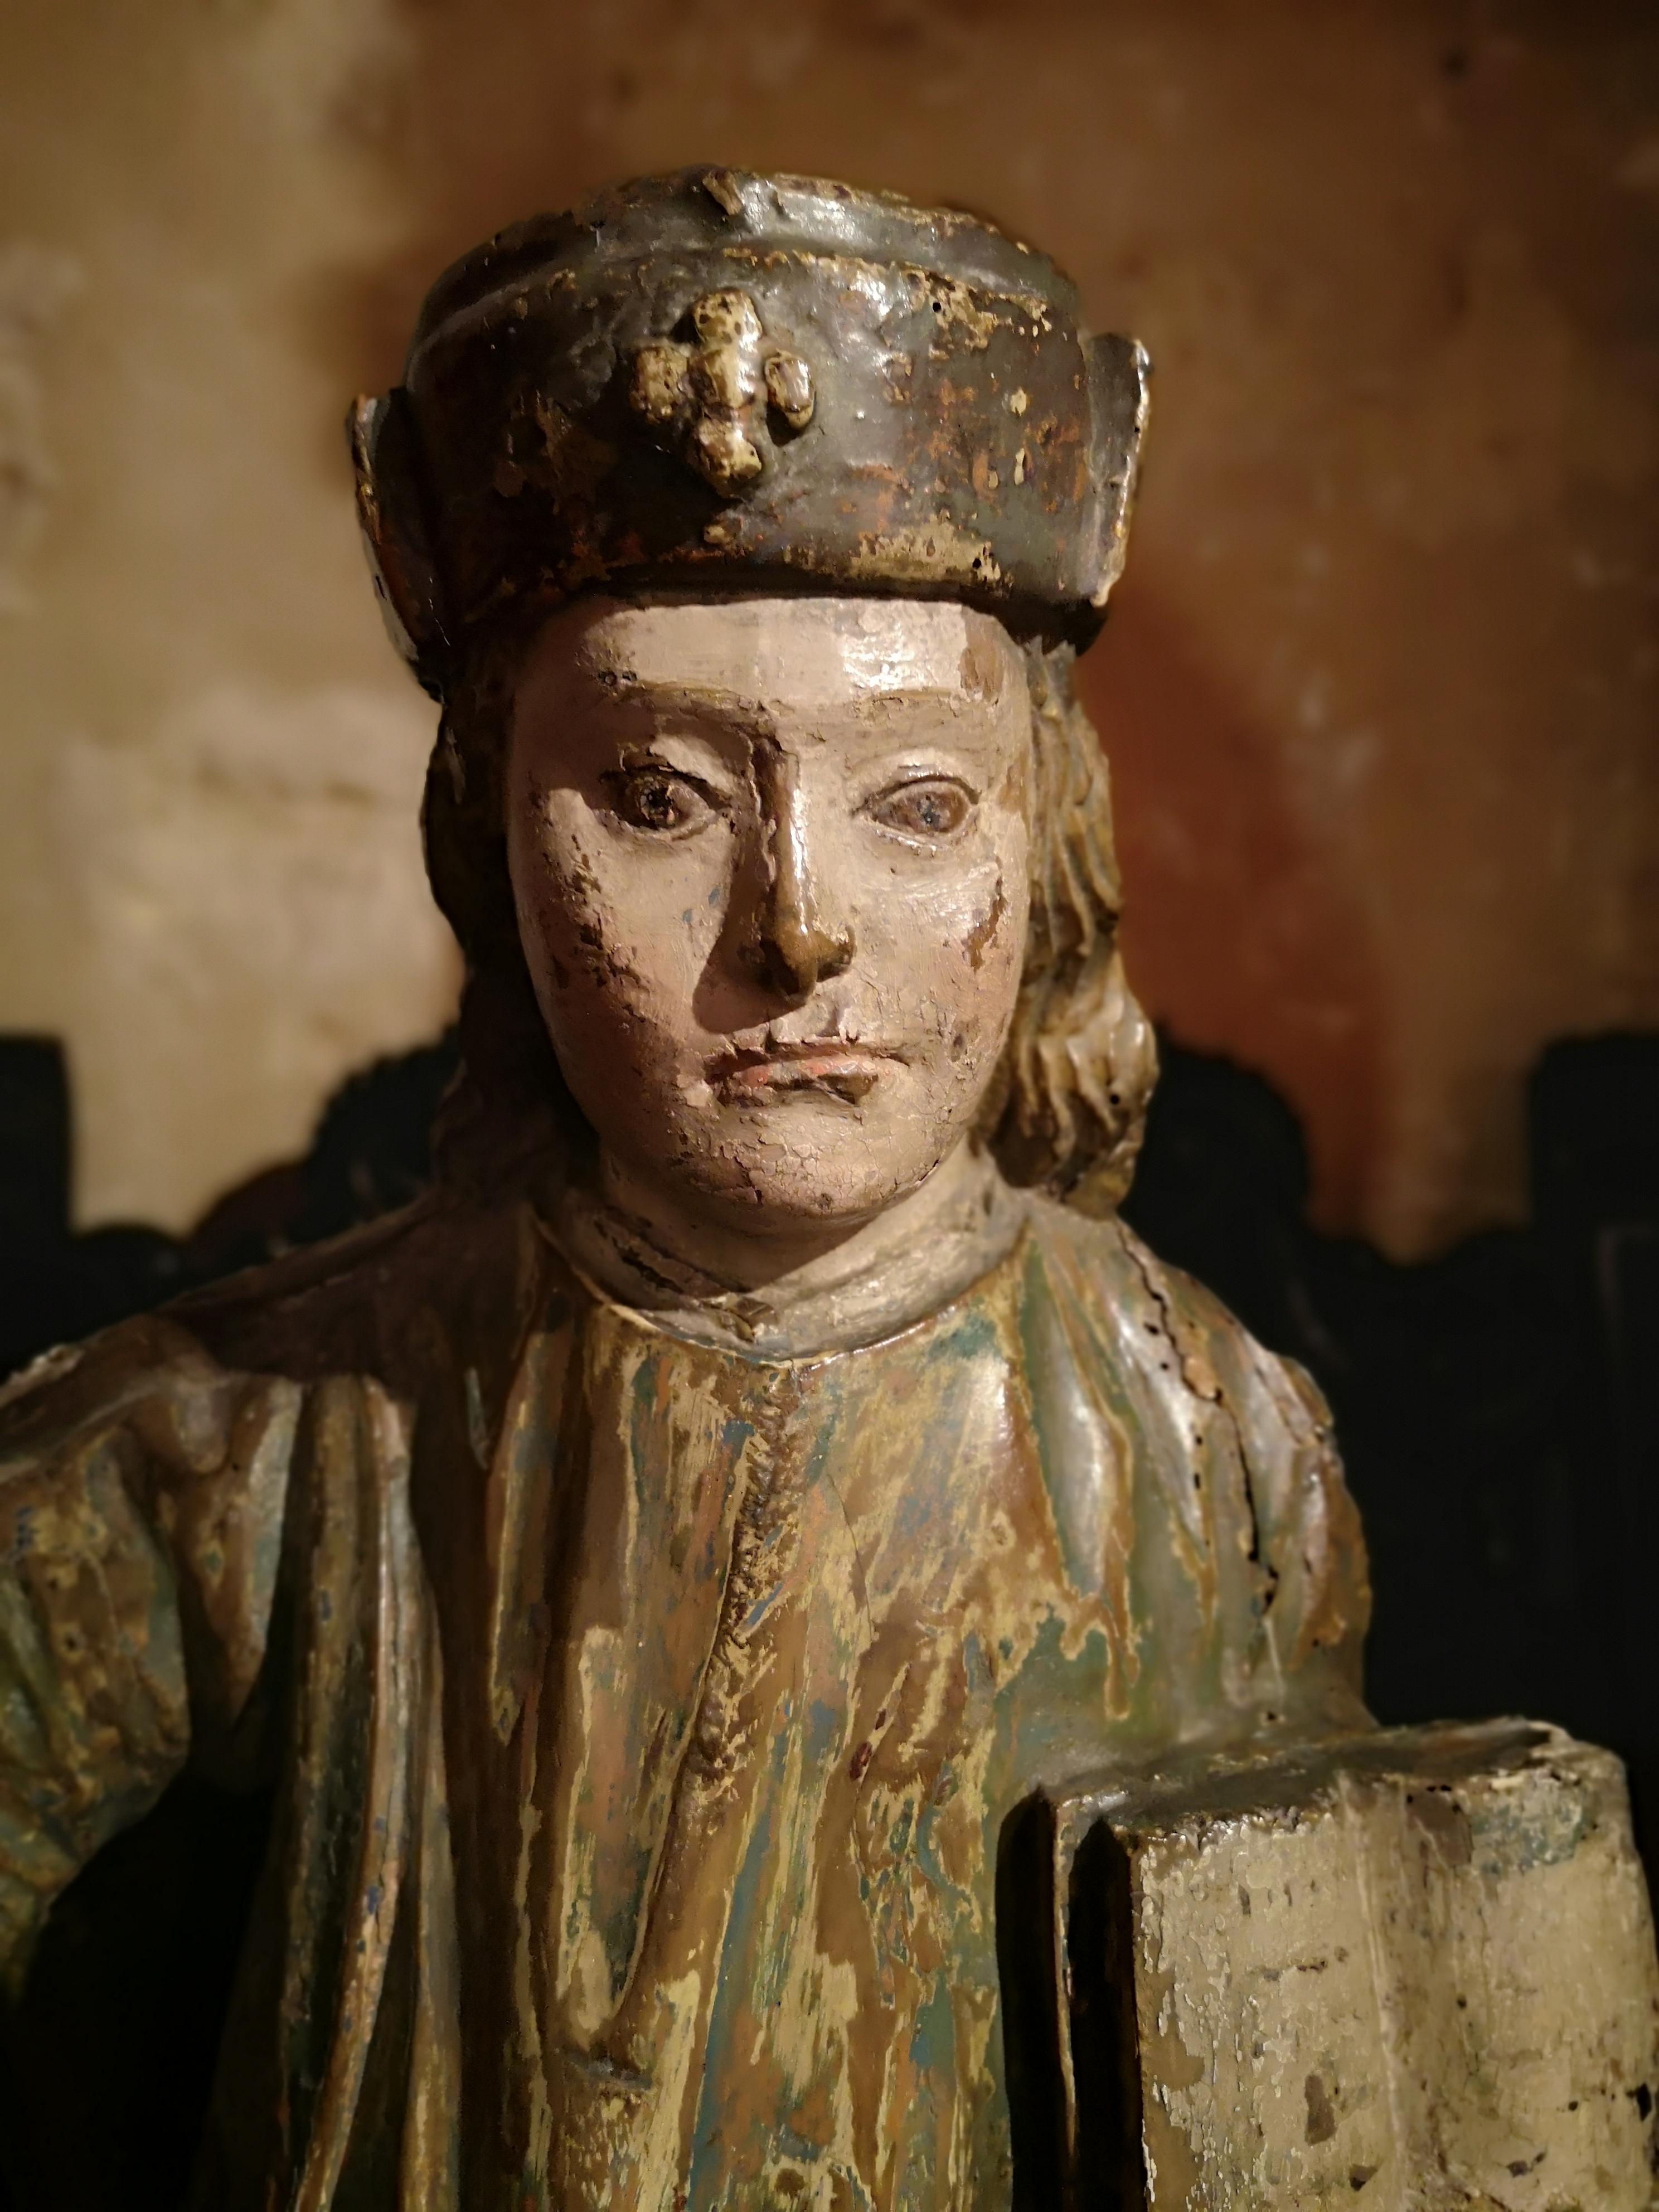 French 15th Century Polychrome Wood Sculpture Depicting Saint James the Major